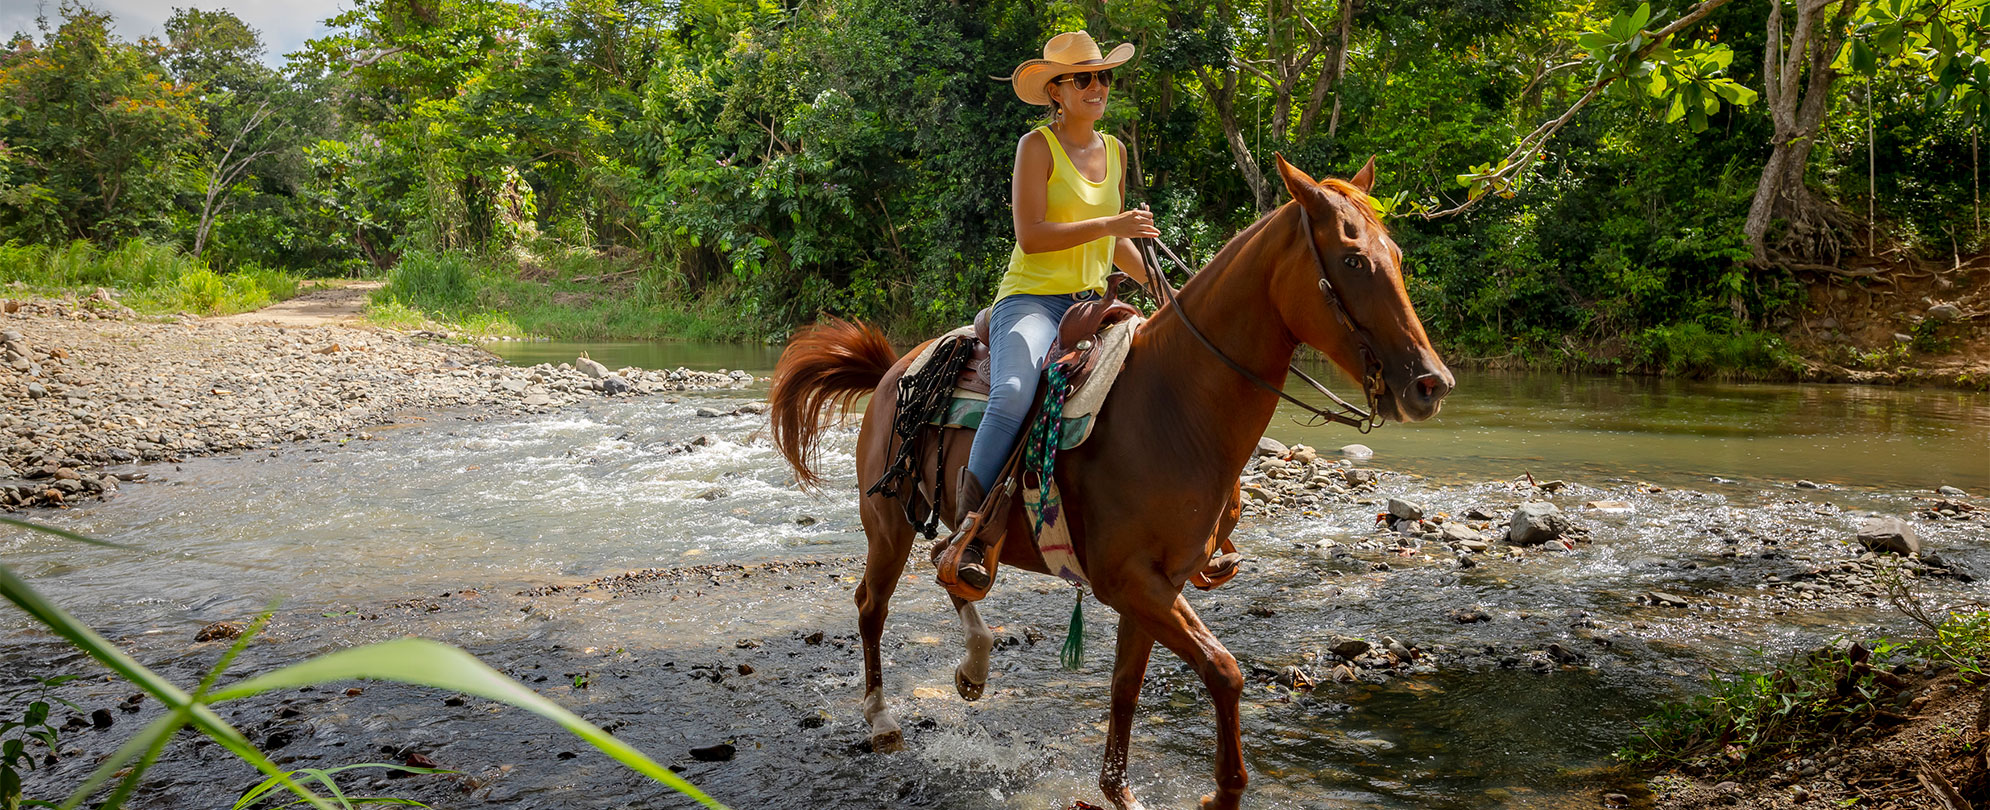 Woman wearing a yellow tank top and a wide-brimmed hat riding a horse through a rocky river. 